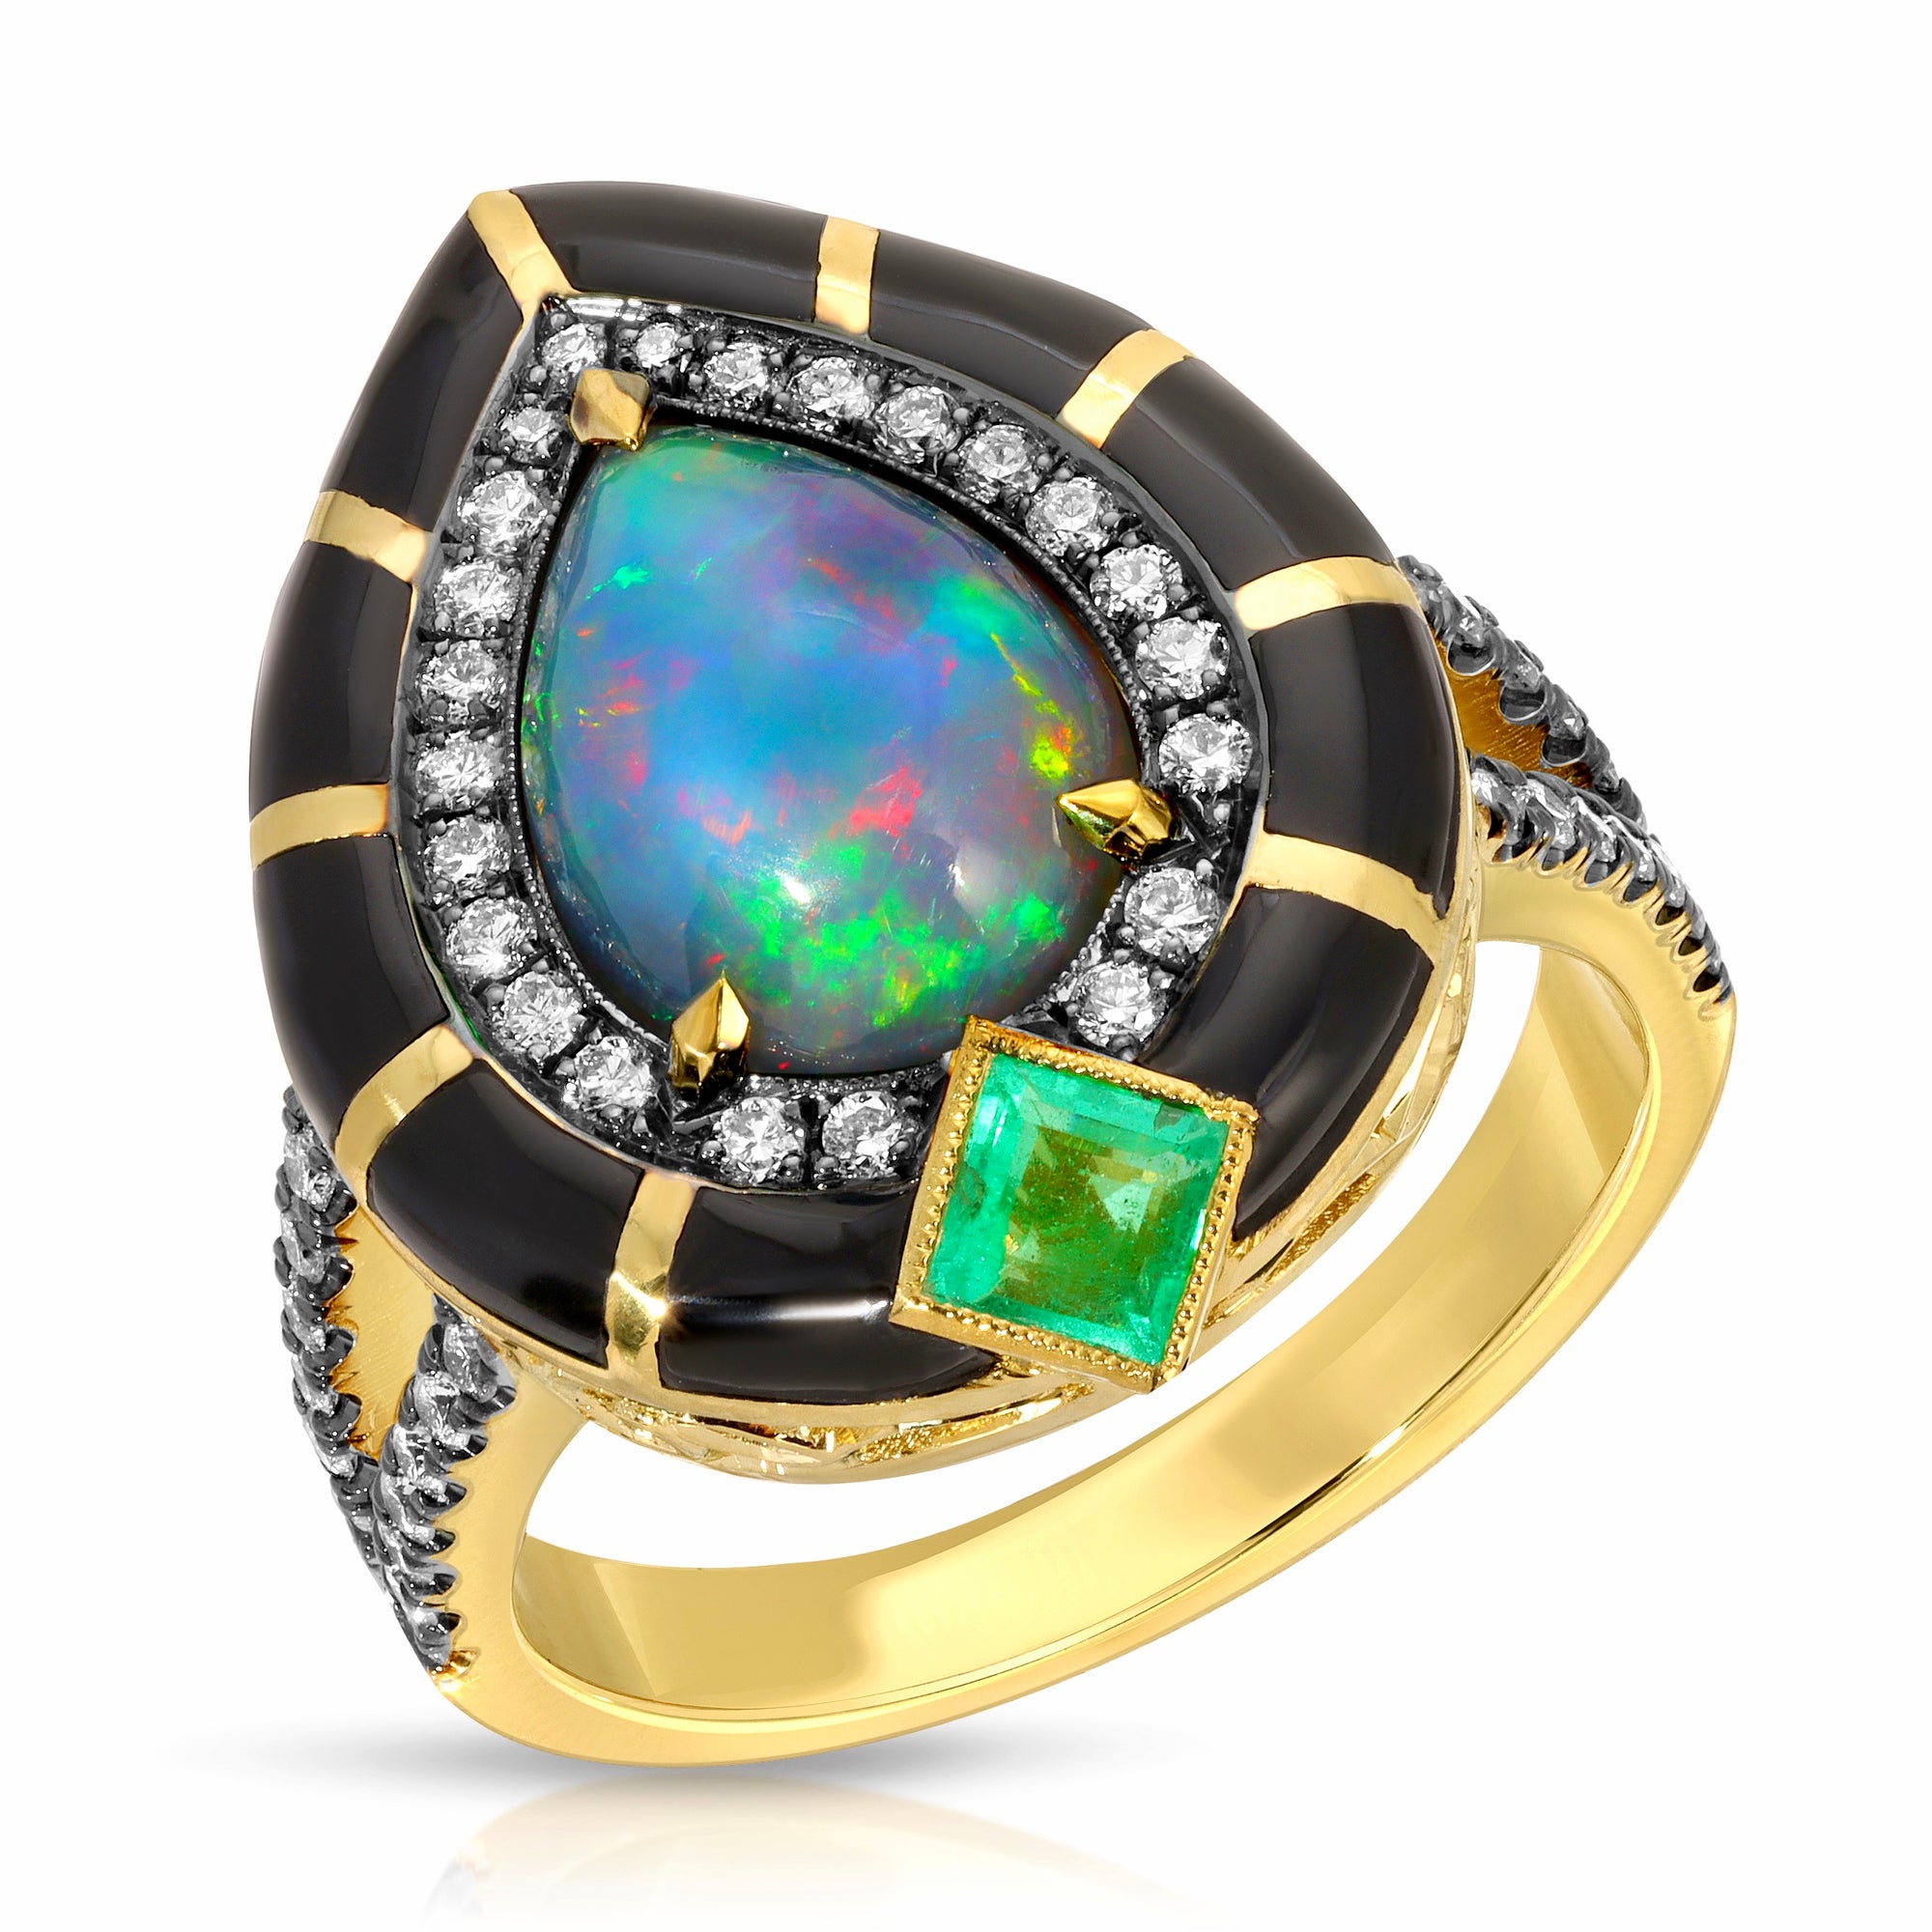 Opal & Emerald Enamel Ring by Lord Jewelry available at Talisman Collection Fine Jewelers in El Dorado Hills, CA and online. Behold the captivating Opal & Emerald Enamel Ring, a true testament to art deco elegance. Handcrafted in radiant 18k gold and sleek black enamel, this ring showcases a spectacular 1.58 ct pear-cut opal, .44 cts of diamonds, and a .35 carat emerald. Its vintage-inspired design exudes timeless charm and sophistication.